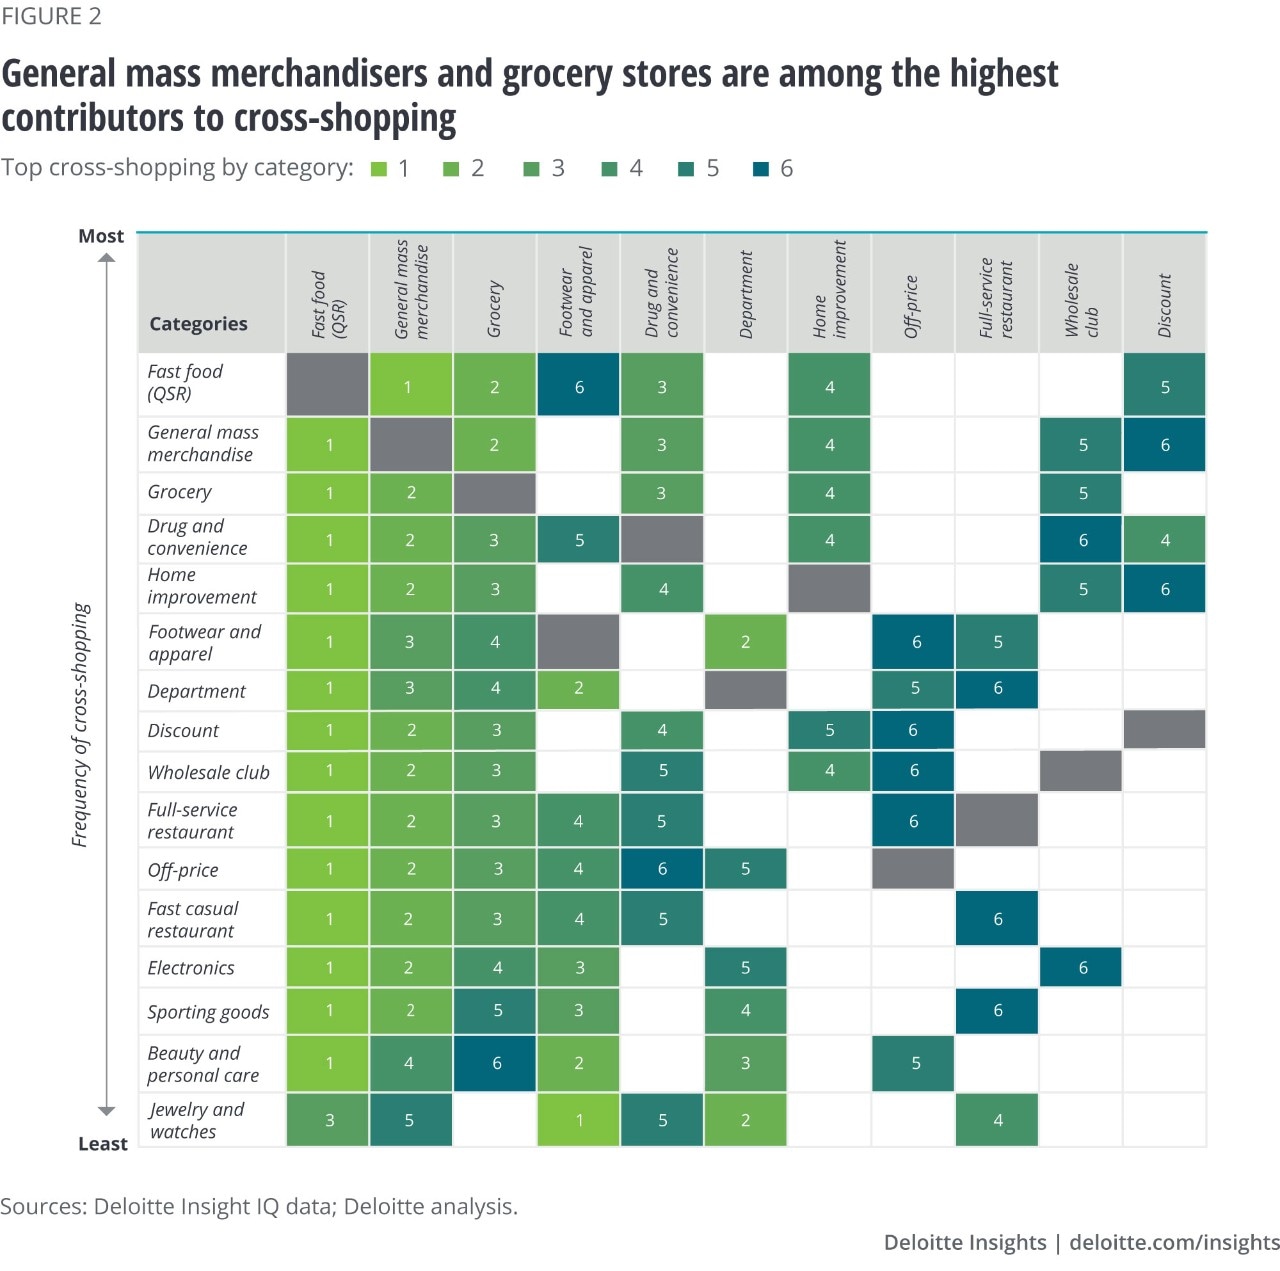 Figure 2. General mass merchandisers and grocery among the highest contributors to cross-shopping 